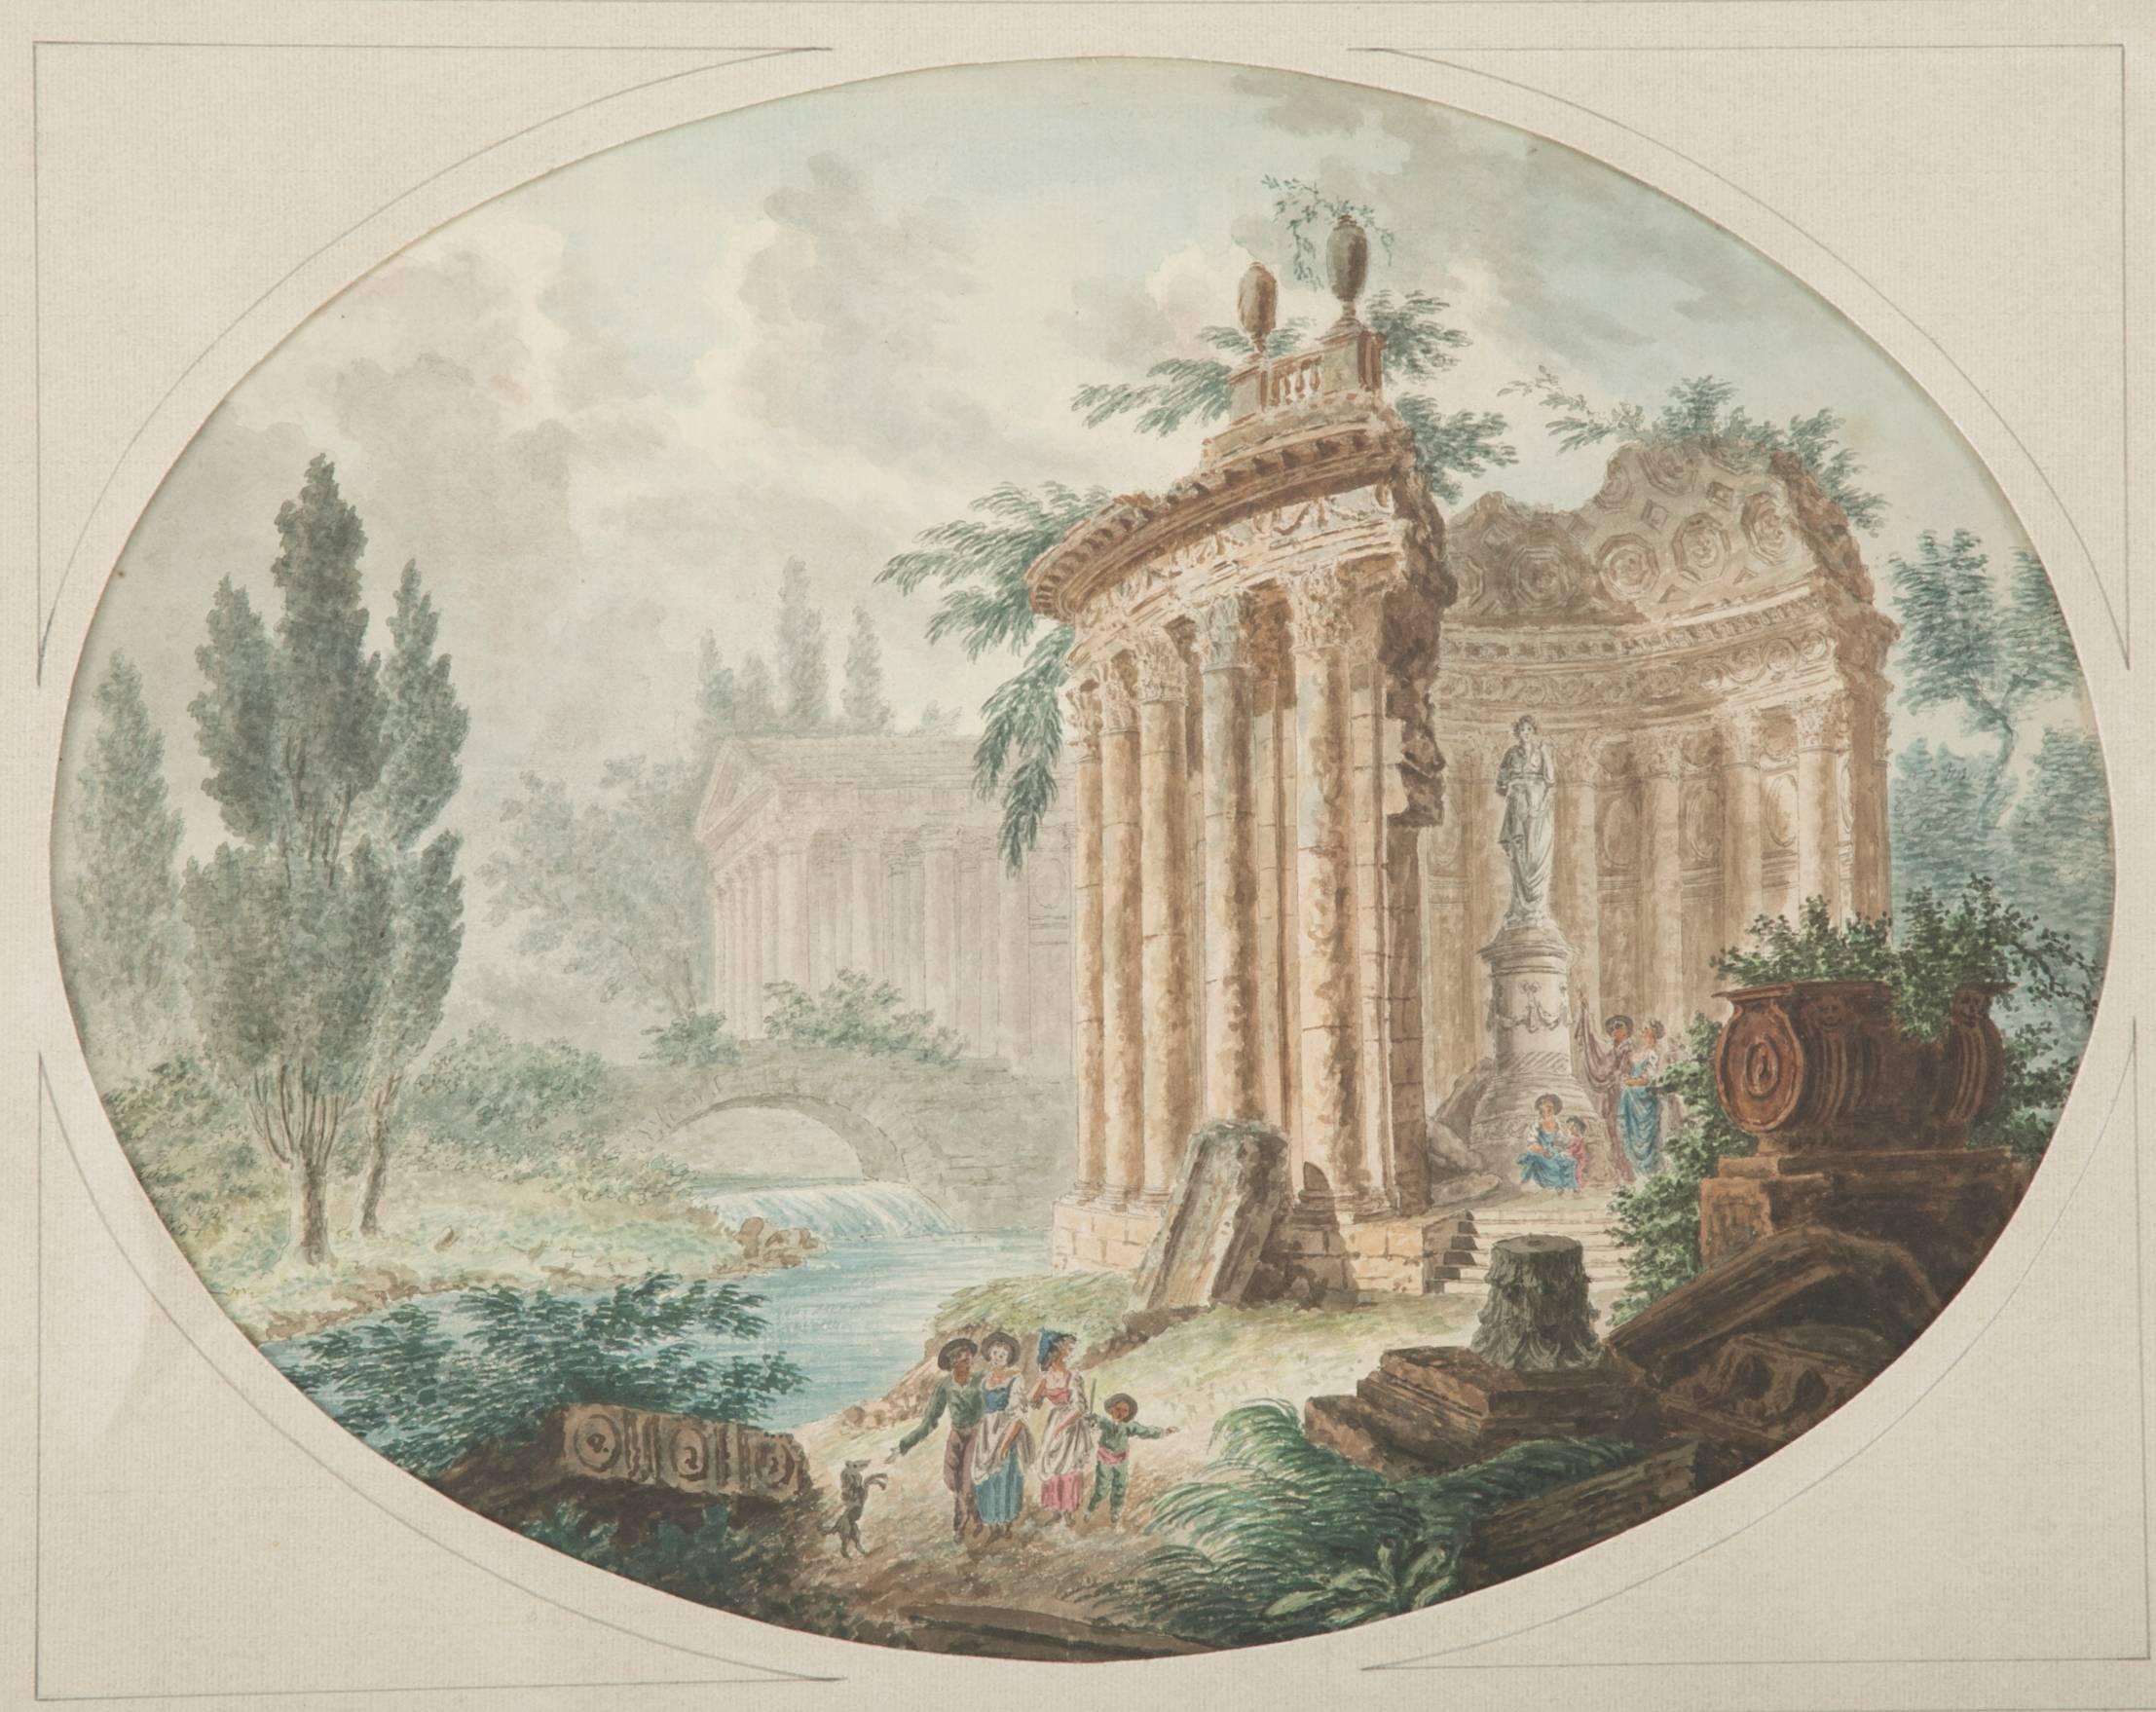 18th century Italian capriccio depicting ruins based on the Roman Temple of Vesta being visited by a group of Grand Tour travelers. With an arched bridge and another columned structure in the background, cypress trees, and architectural fragments